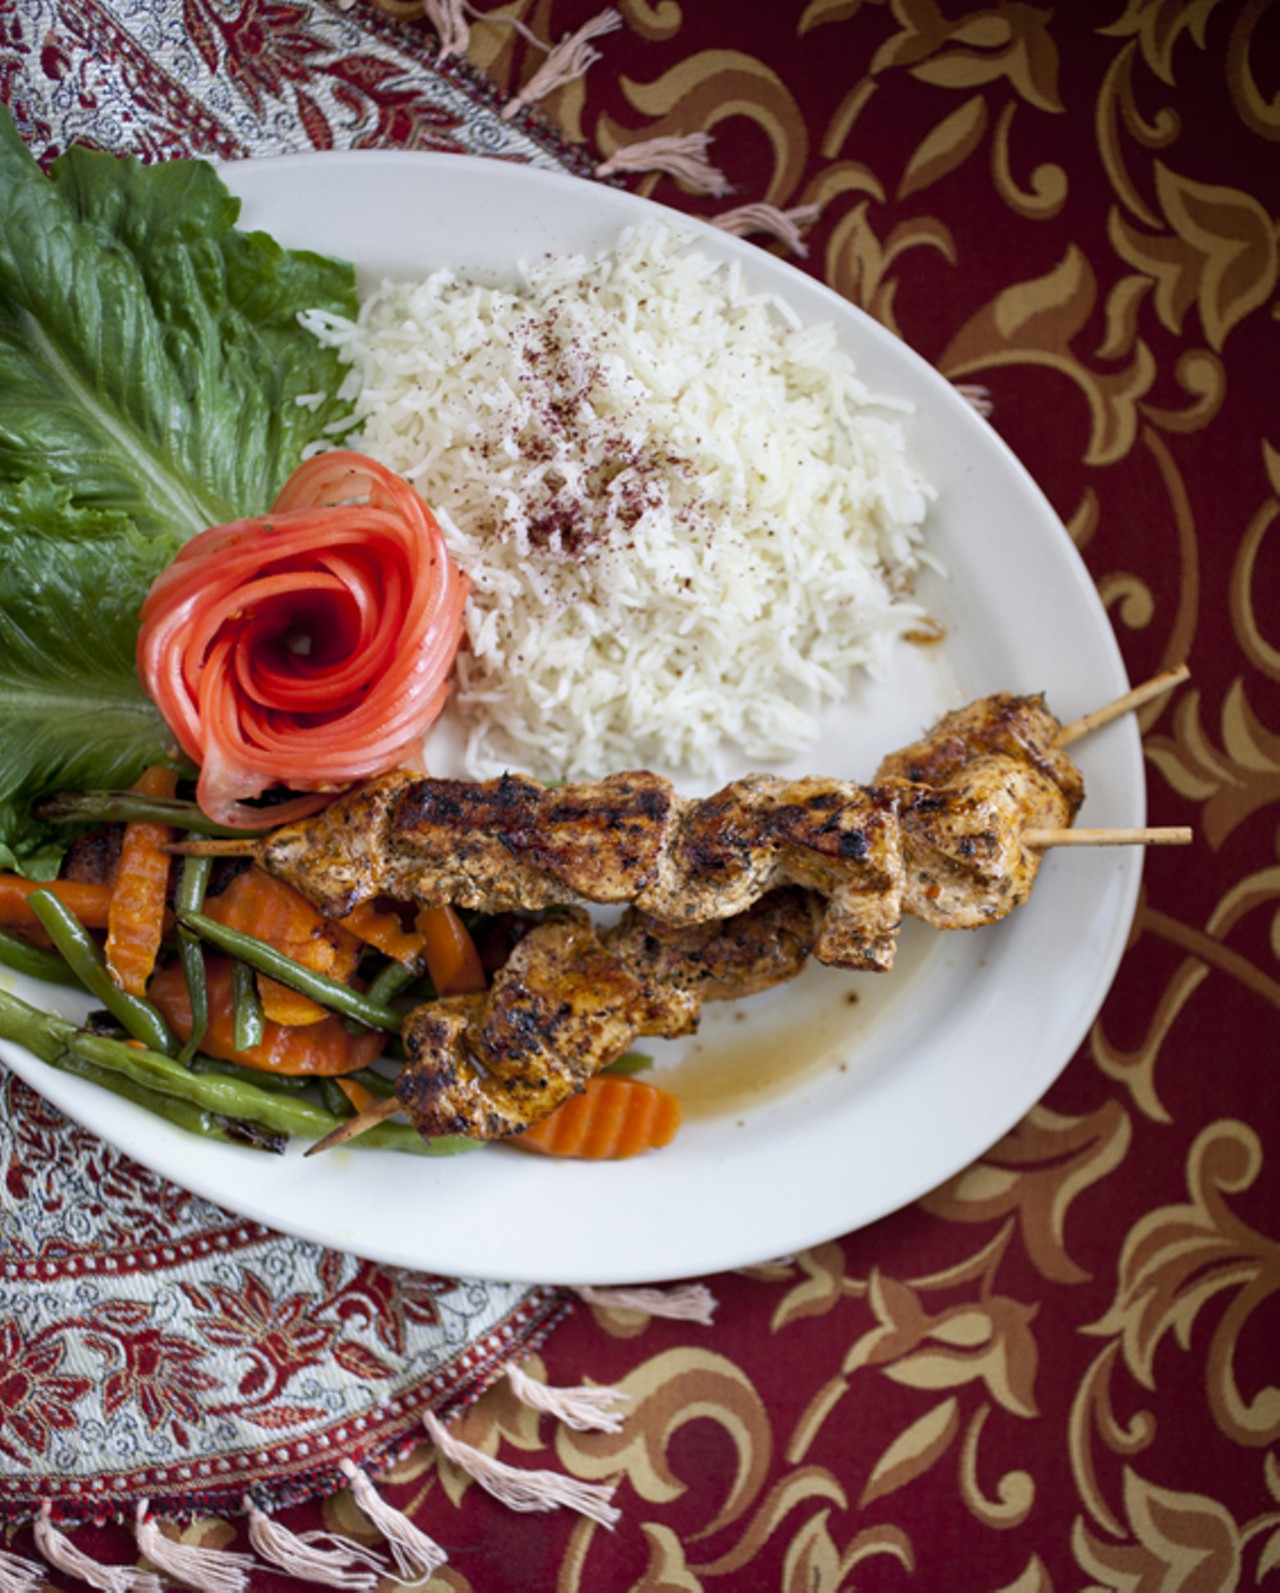 Chicken Shish Kabab - grilled chicken breast marinated in garlic, lemon juice and a spice blend served on a skewer with basmati rice and seasonal fresh vegetables.